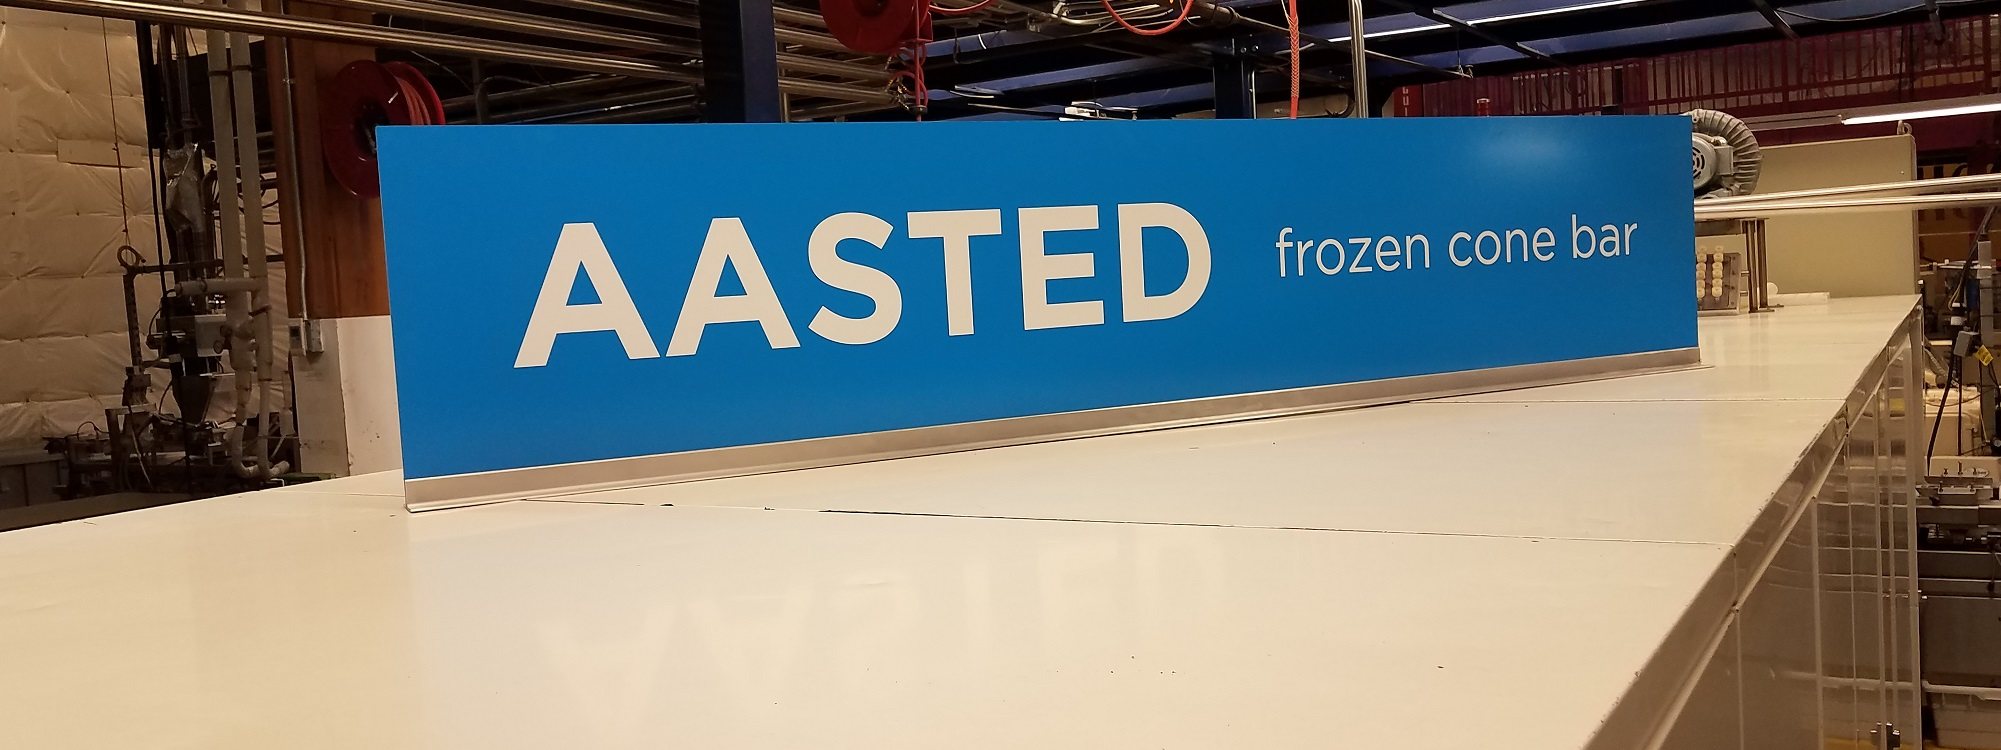 AASTED frozen cone bar